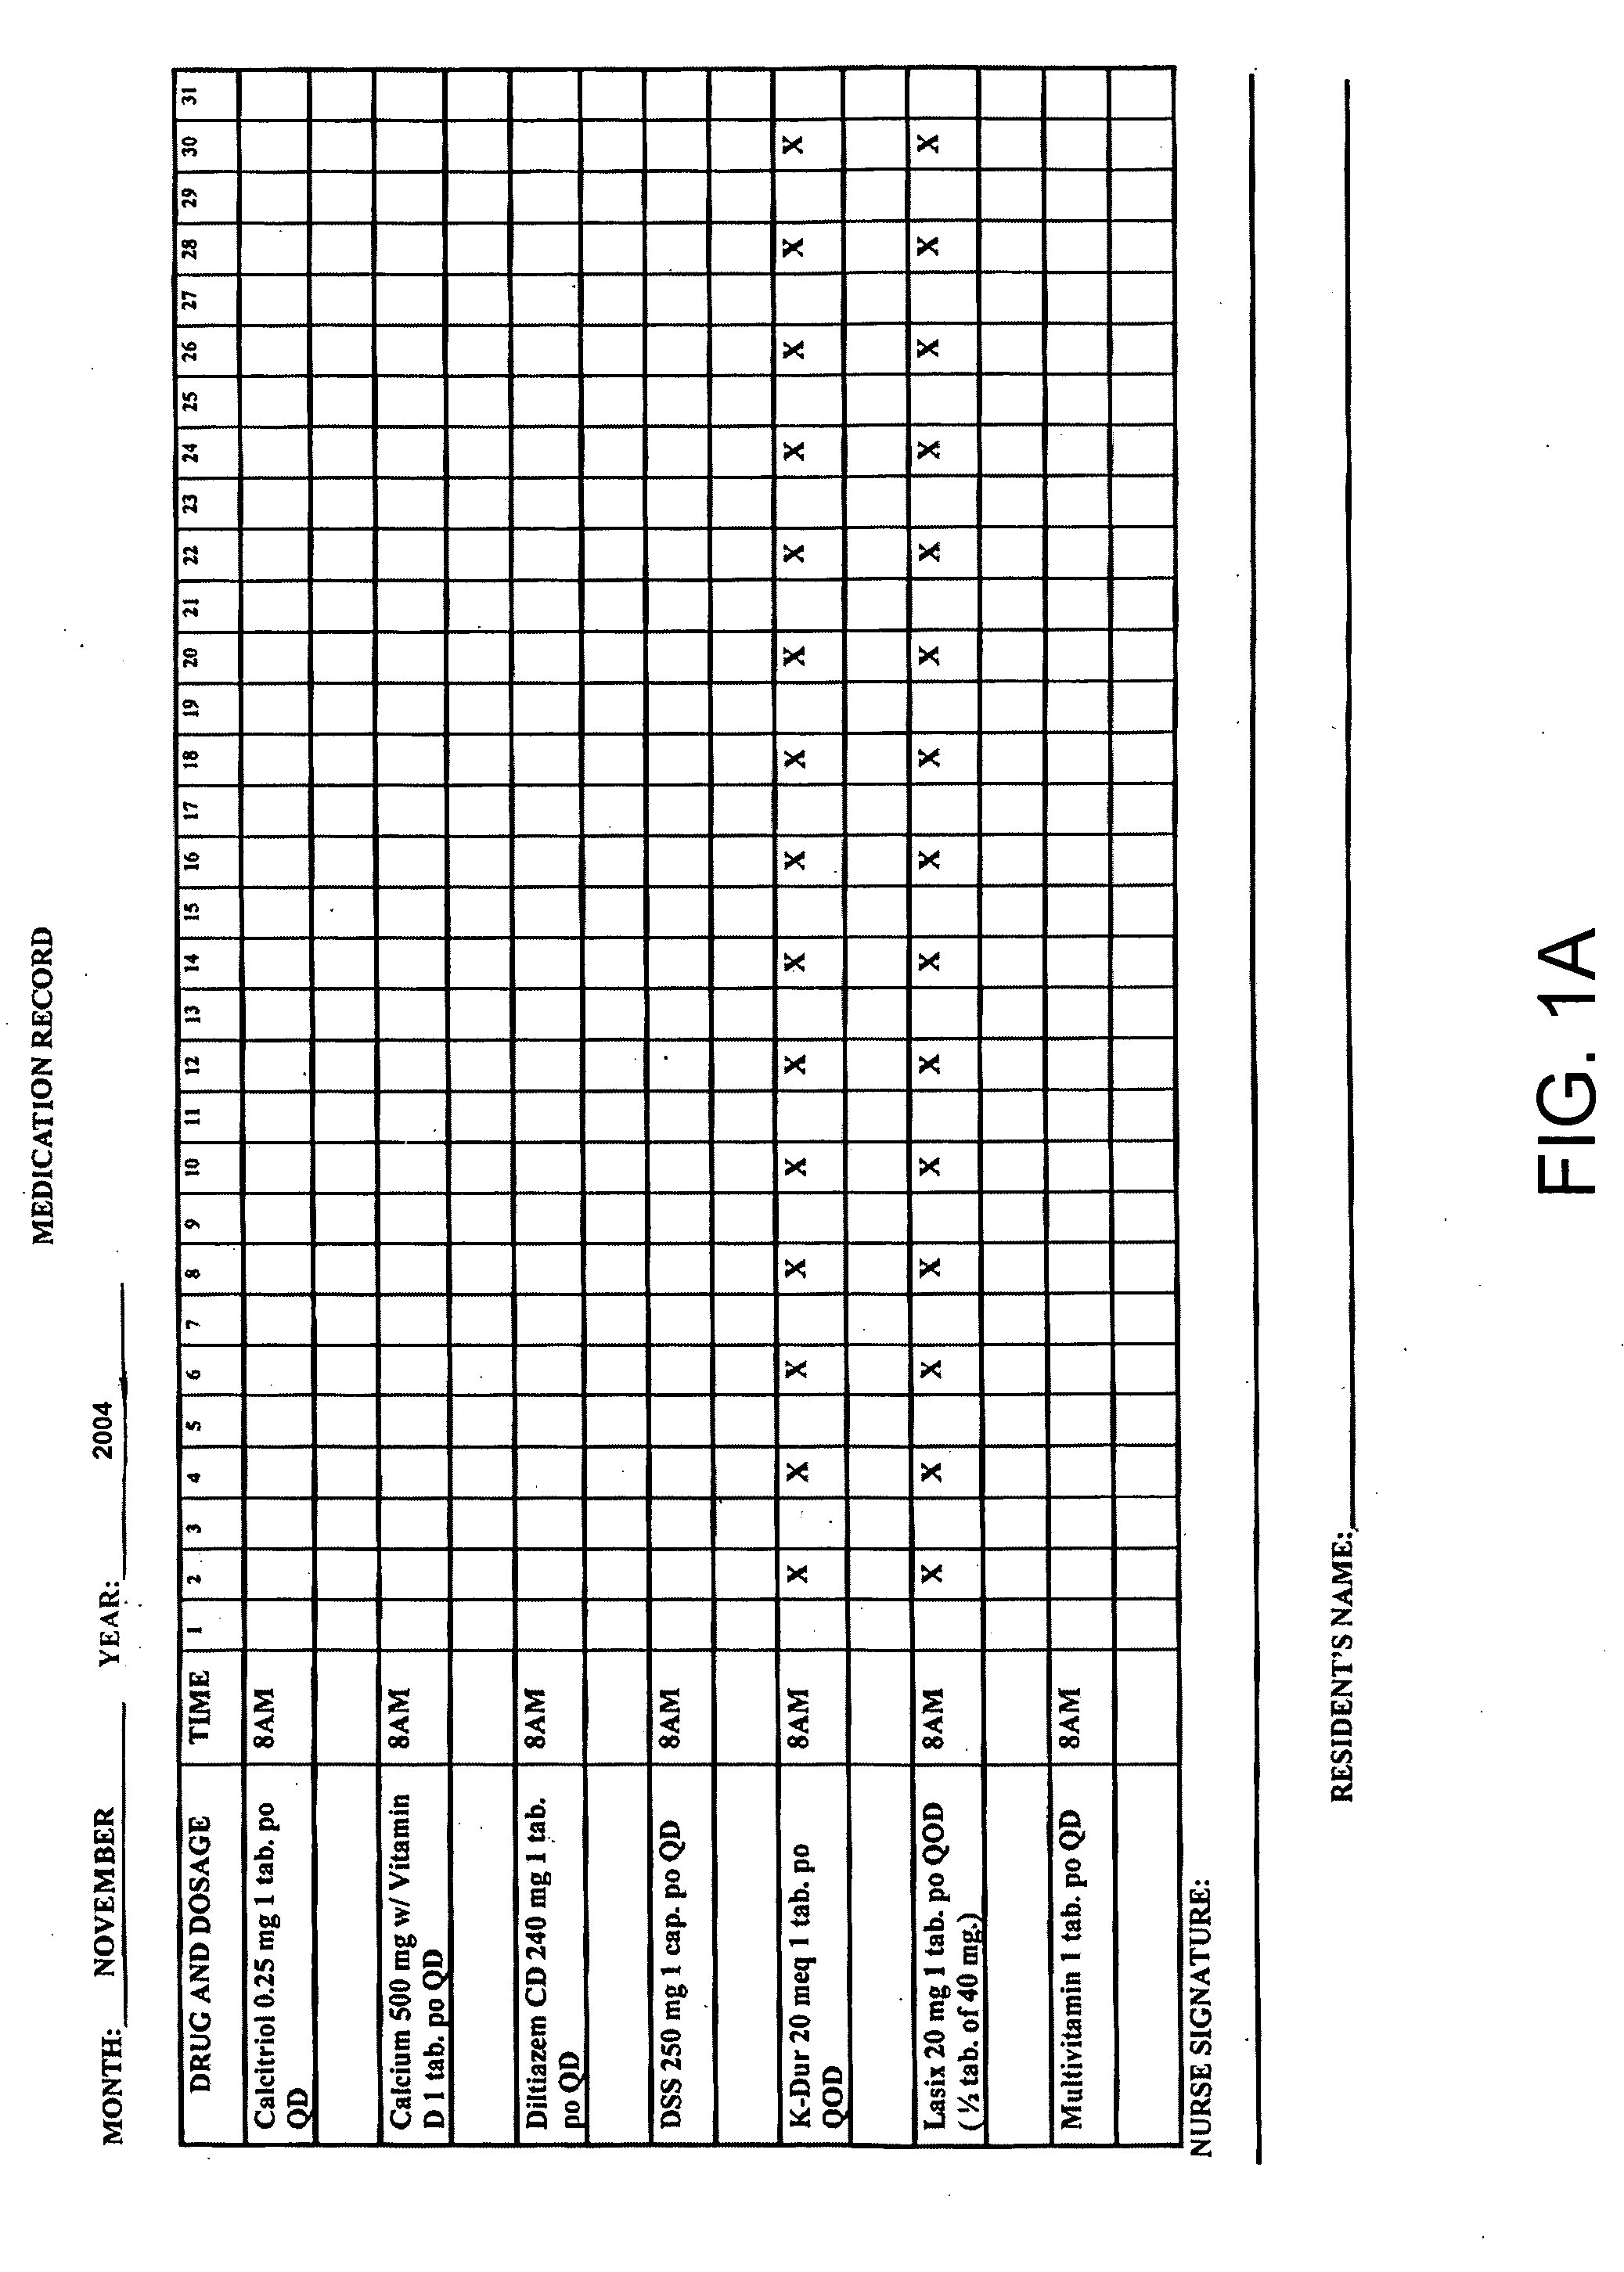 System and method for scheduling pharmaceutical prescriptions